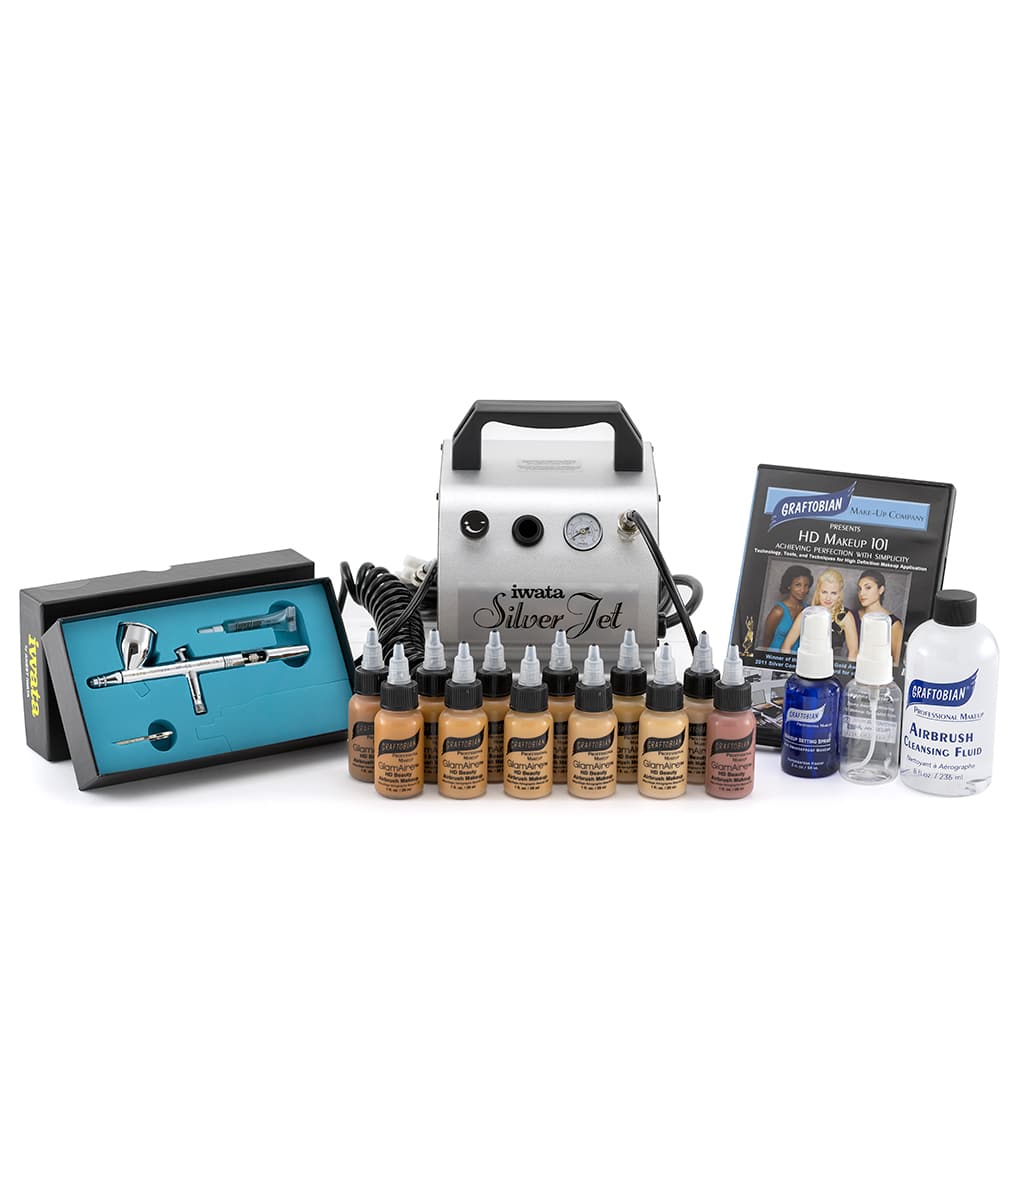 Iwata ECL 2001 Airbrush Kit - Silver for sale online